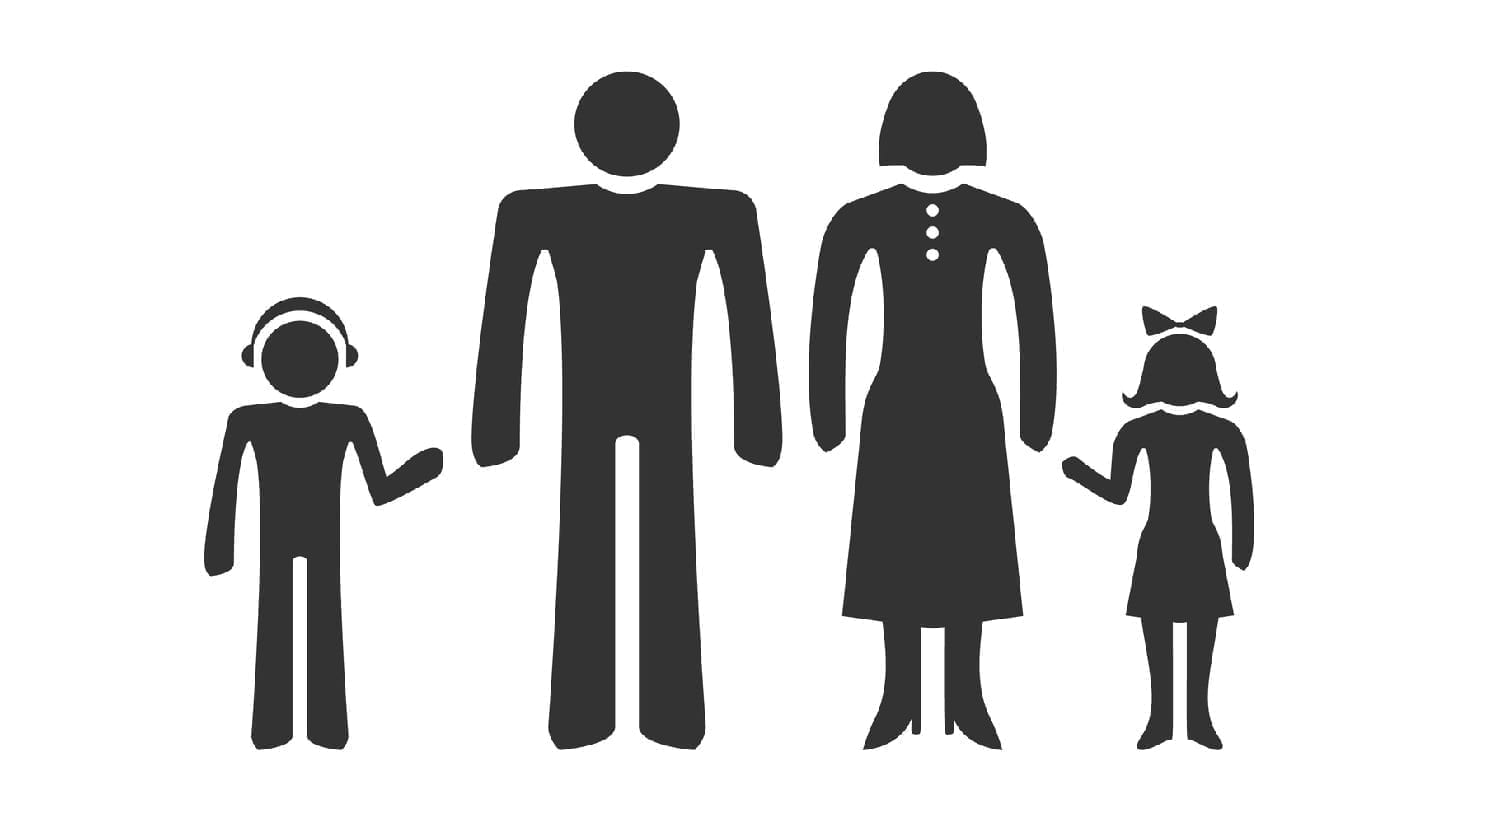 Family silhouettes, male and female: ID 45972678 © Drawnkeeper | Dreamstime.com